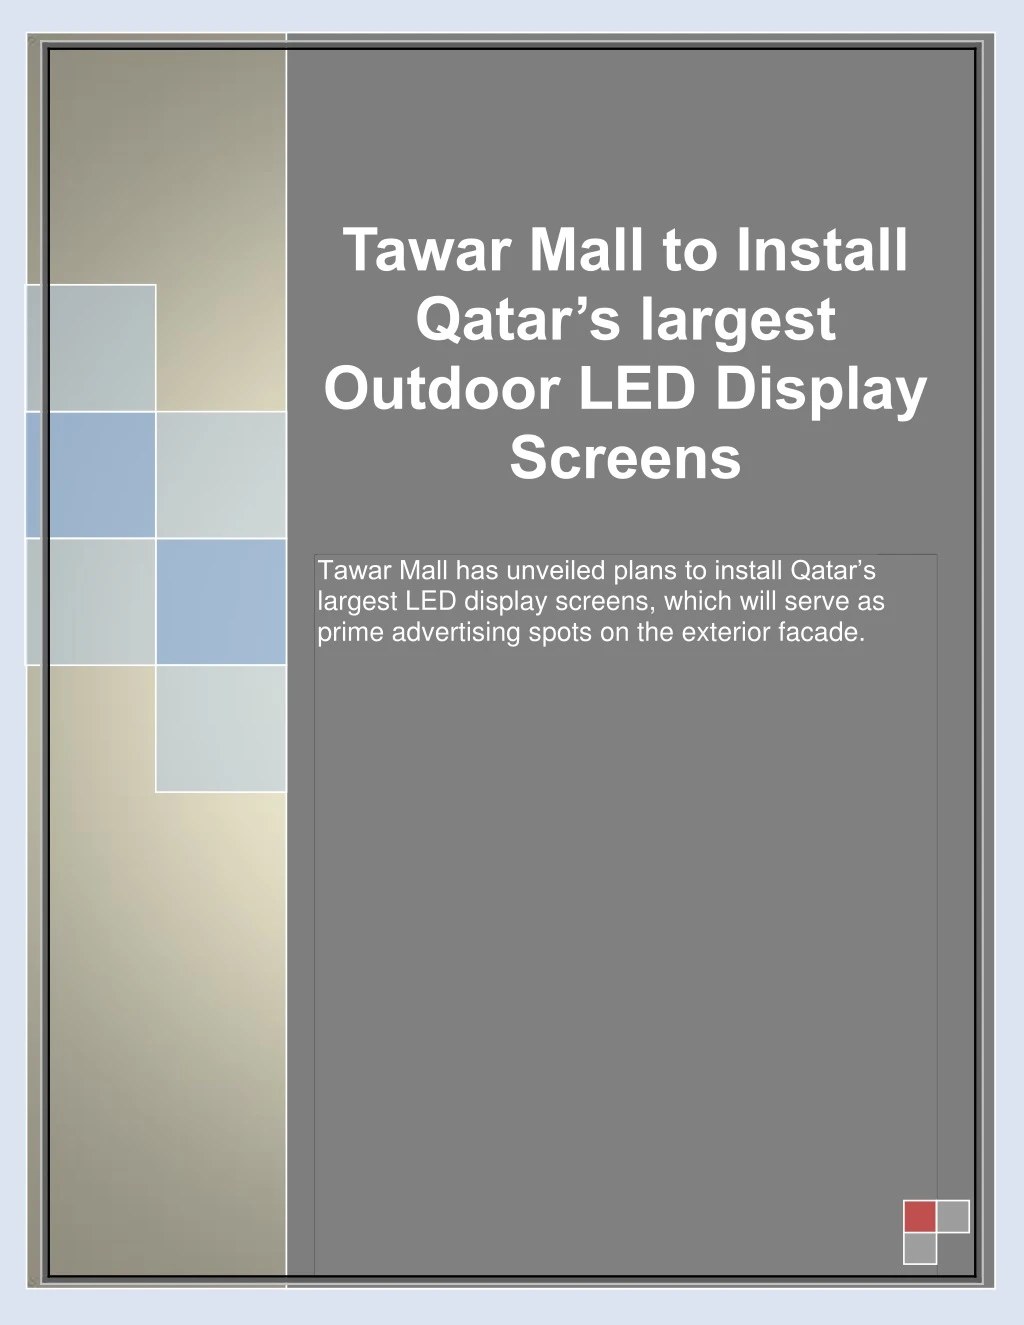 tawar mall to install qatar s largest outdoor